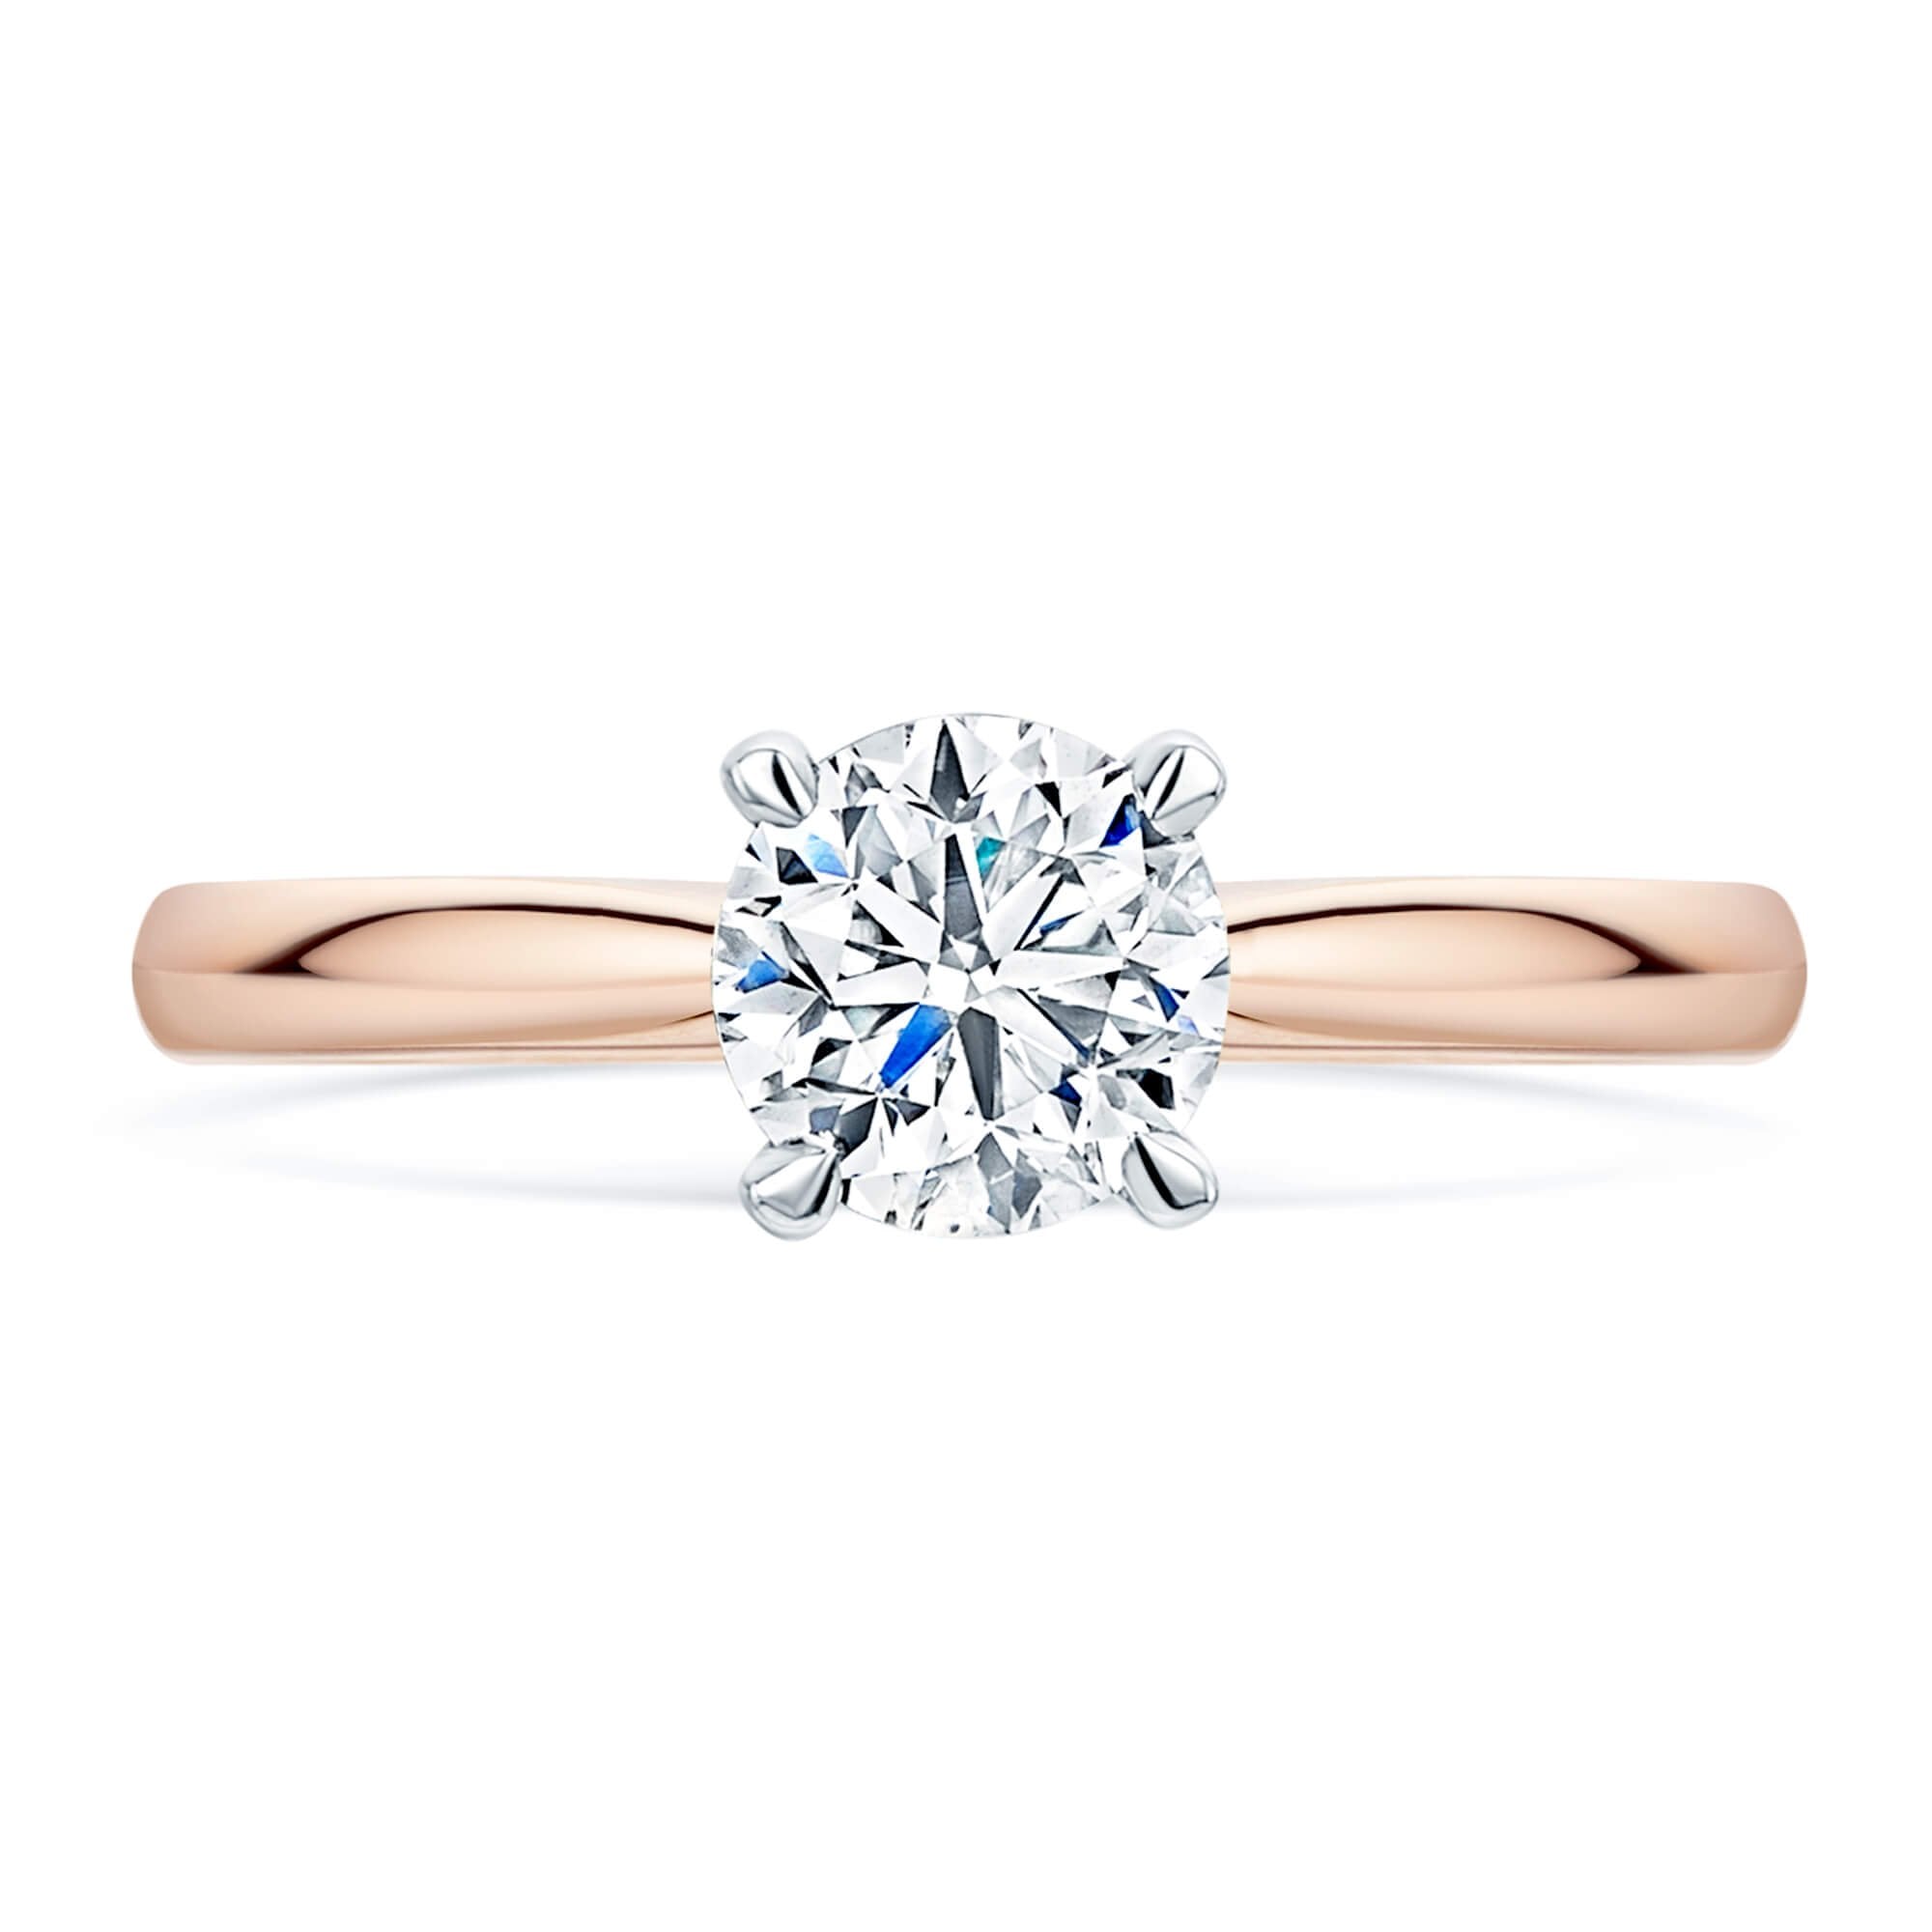 Simply Solitaire Collection 18ct Rose Gold Diamond Solitaire Engagement Ring GIA Certified 1.00 Carat